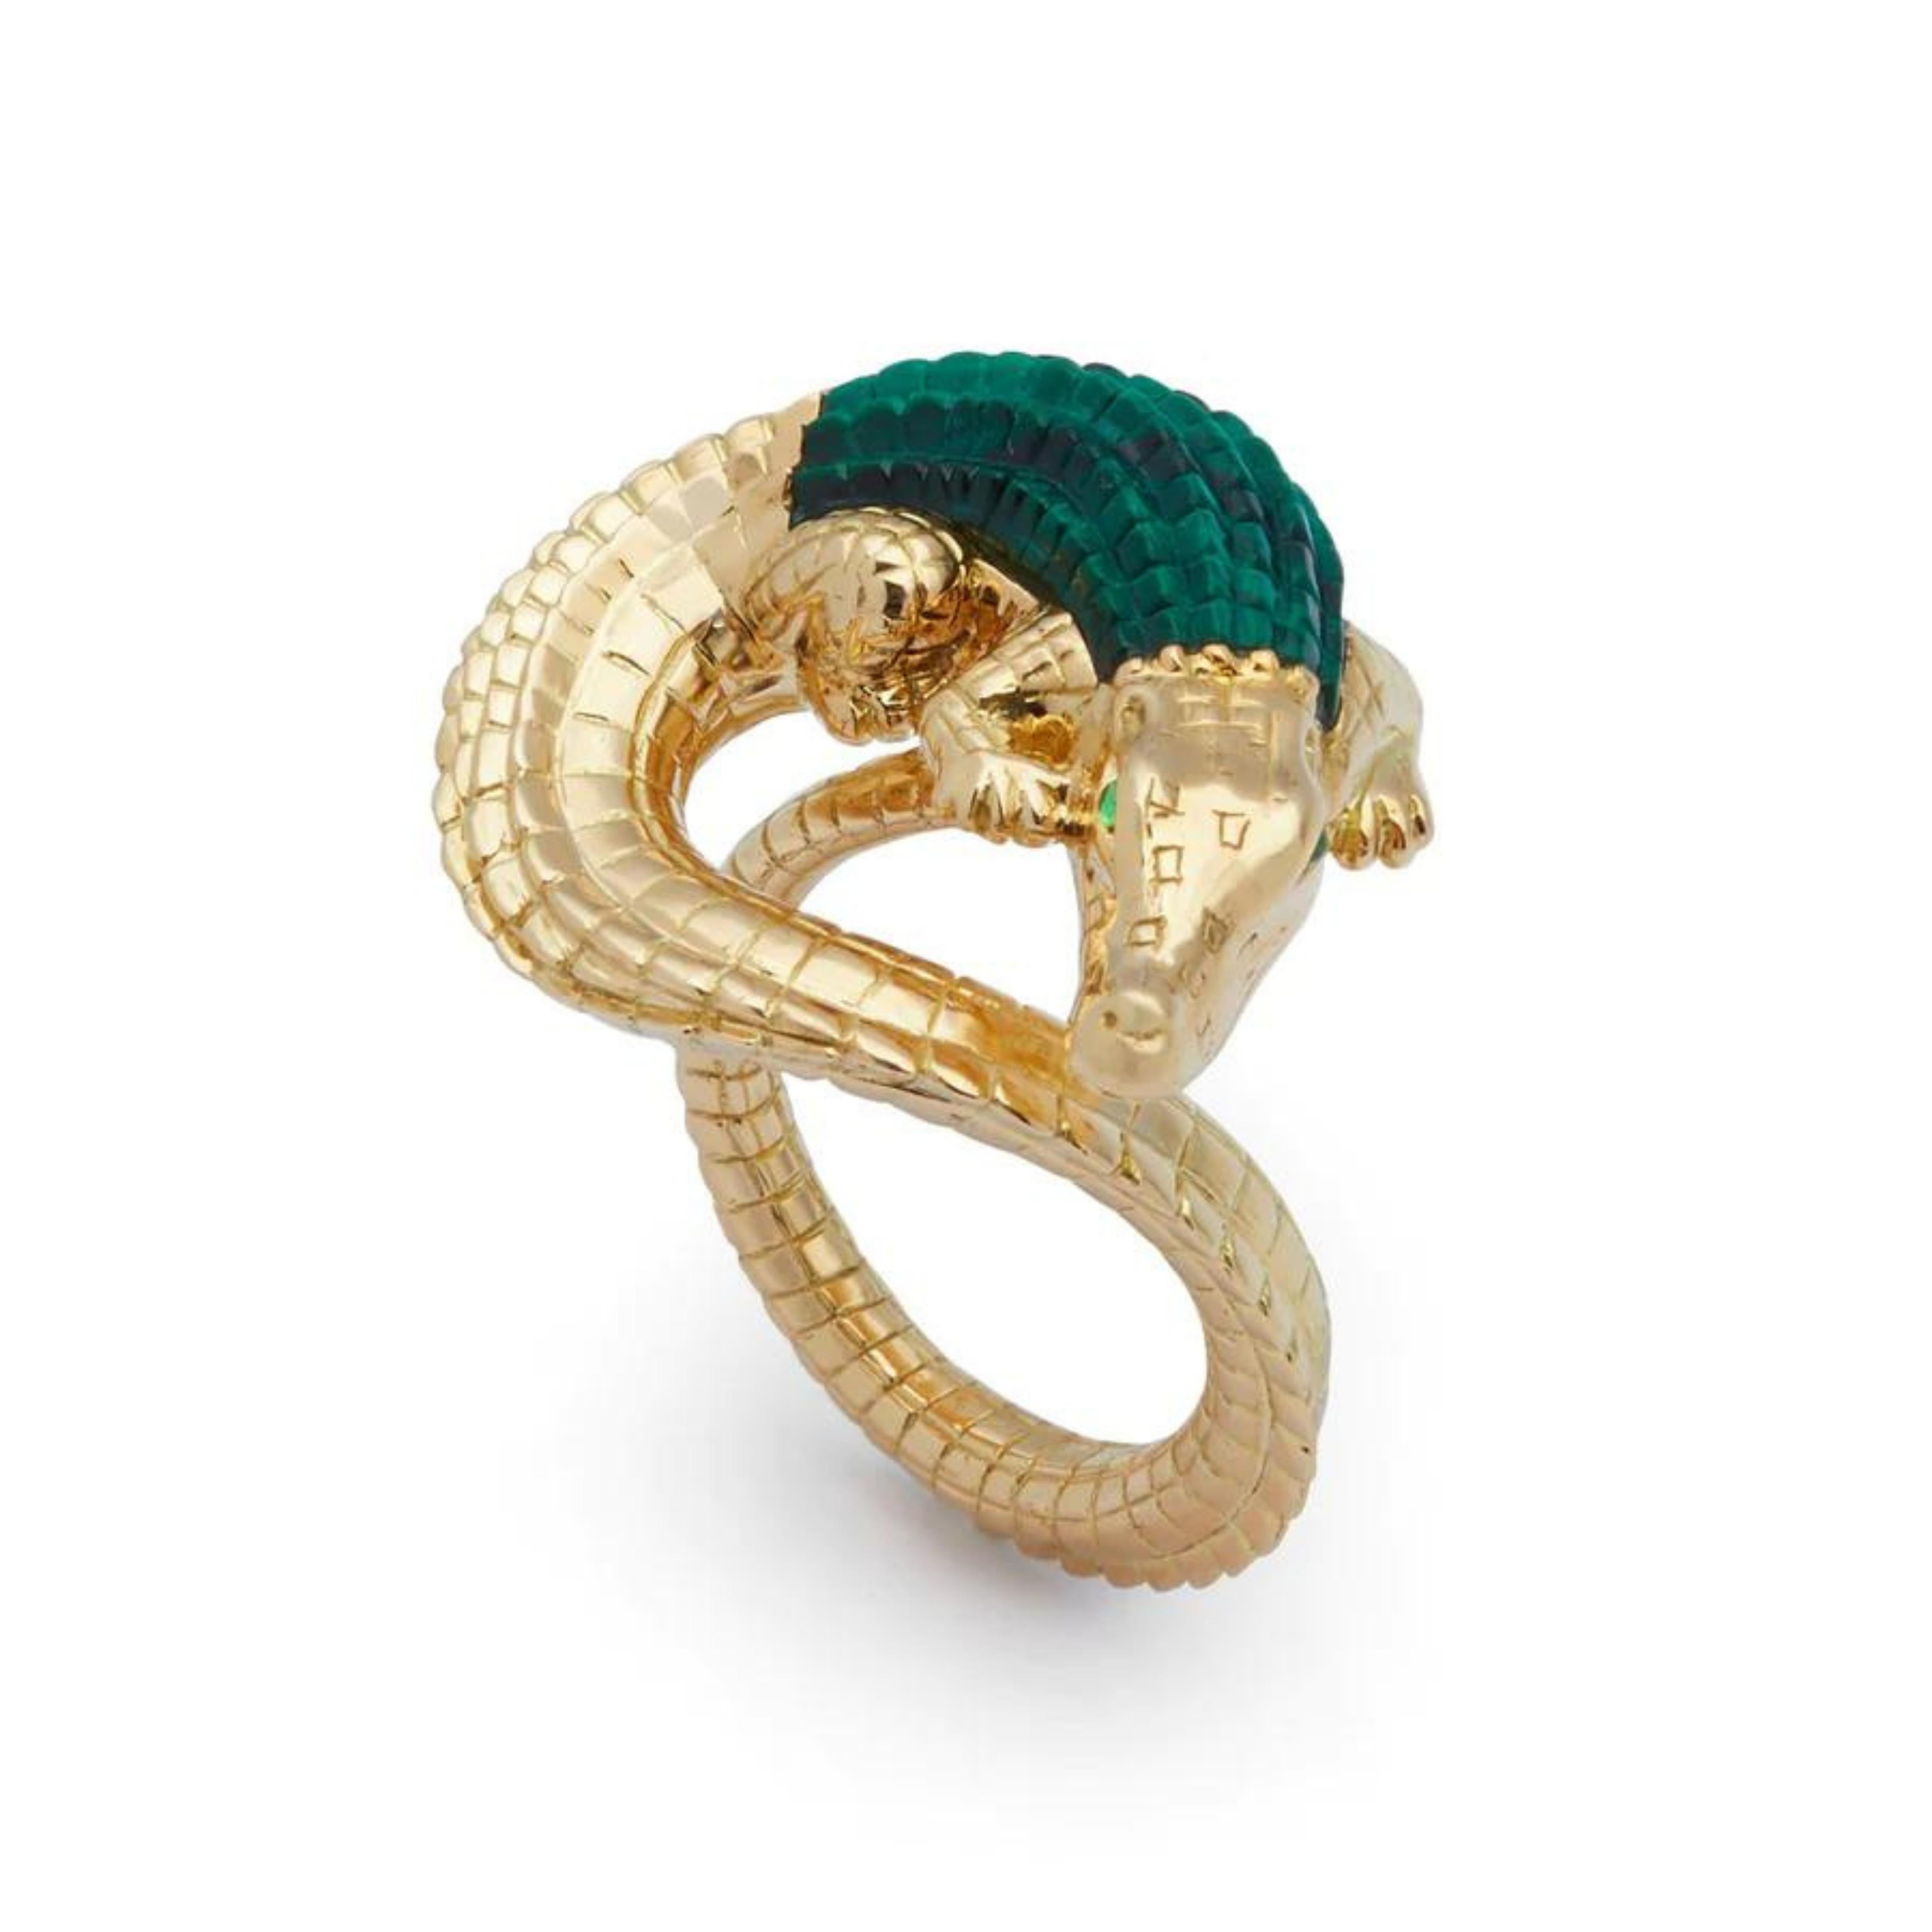 Bibi van der Velden Alligator Twist Ring in Malachite. An intricately carved ring crafted from 18K Gold with a malachite stone alligator body. The alligator is twisted from tail to nose and the ring is set beneath the scultpure. Photo shown from the top view.